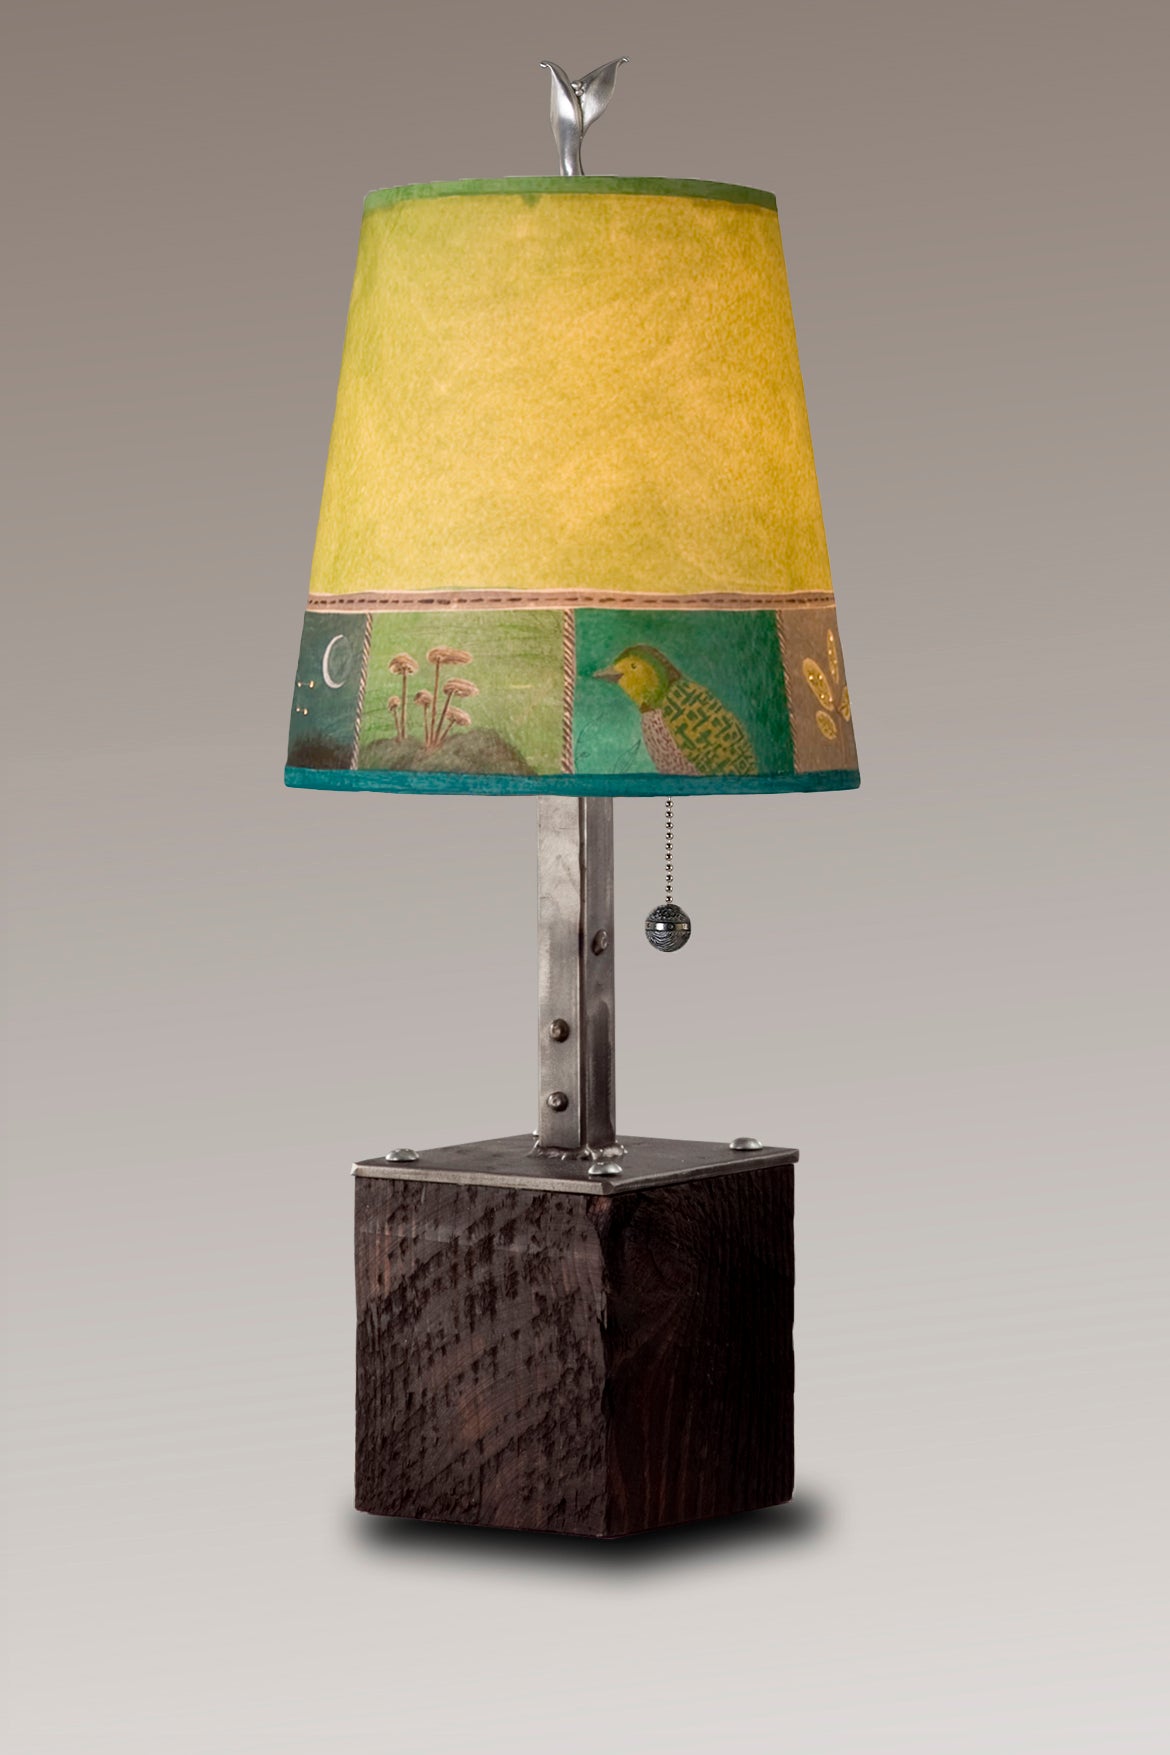 Janna Ugone &amp; Co Table Lamps Steel Table Lamp on Reclaimed Wood with Small Drum Shade in Woodland Trails in Leaf